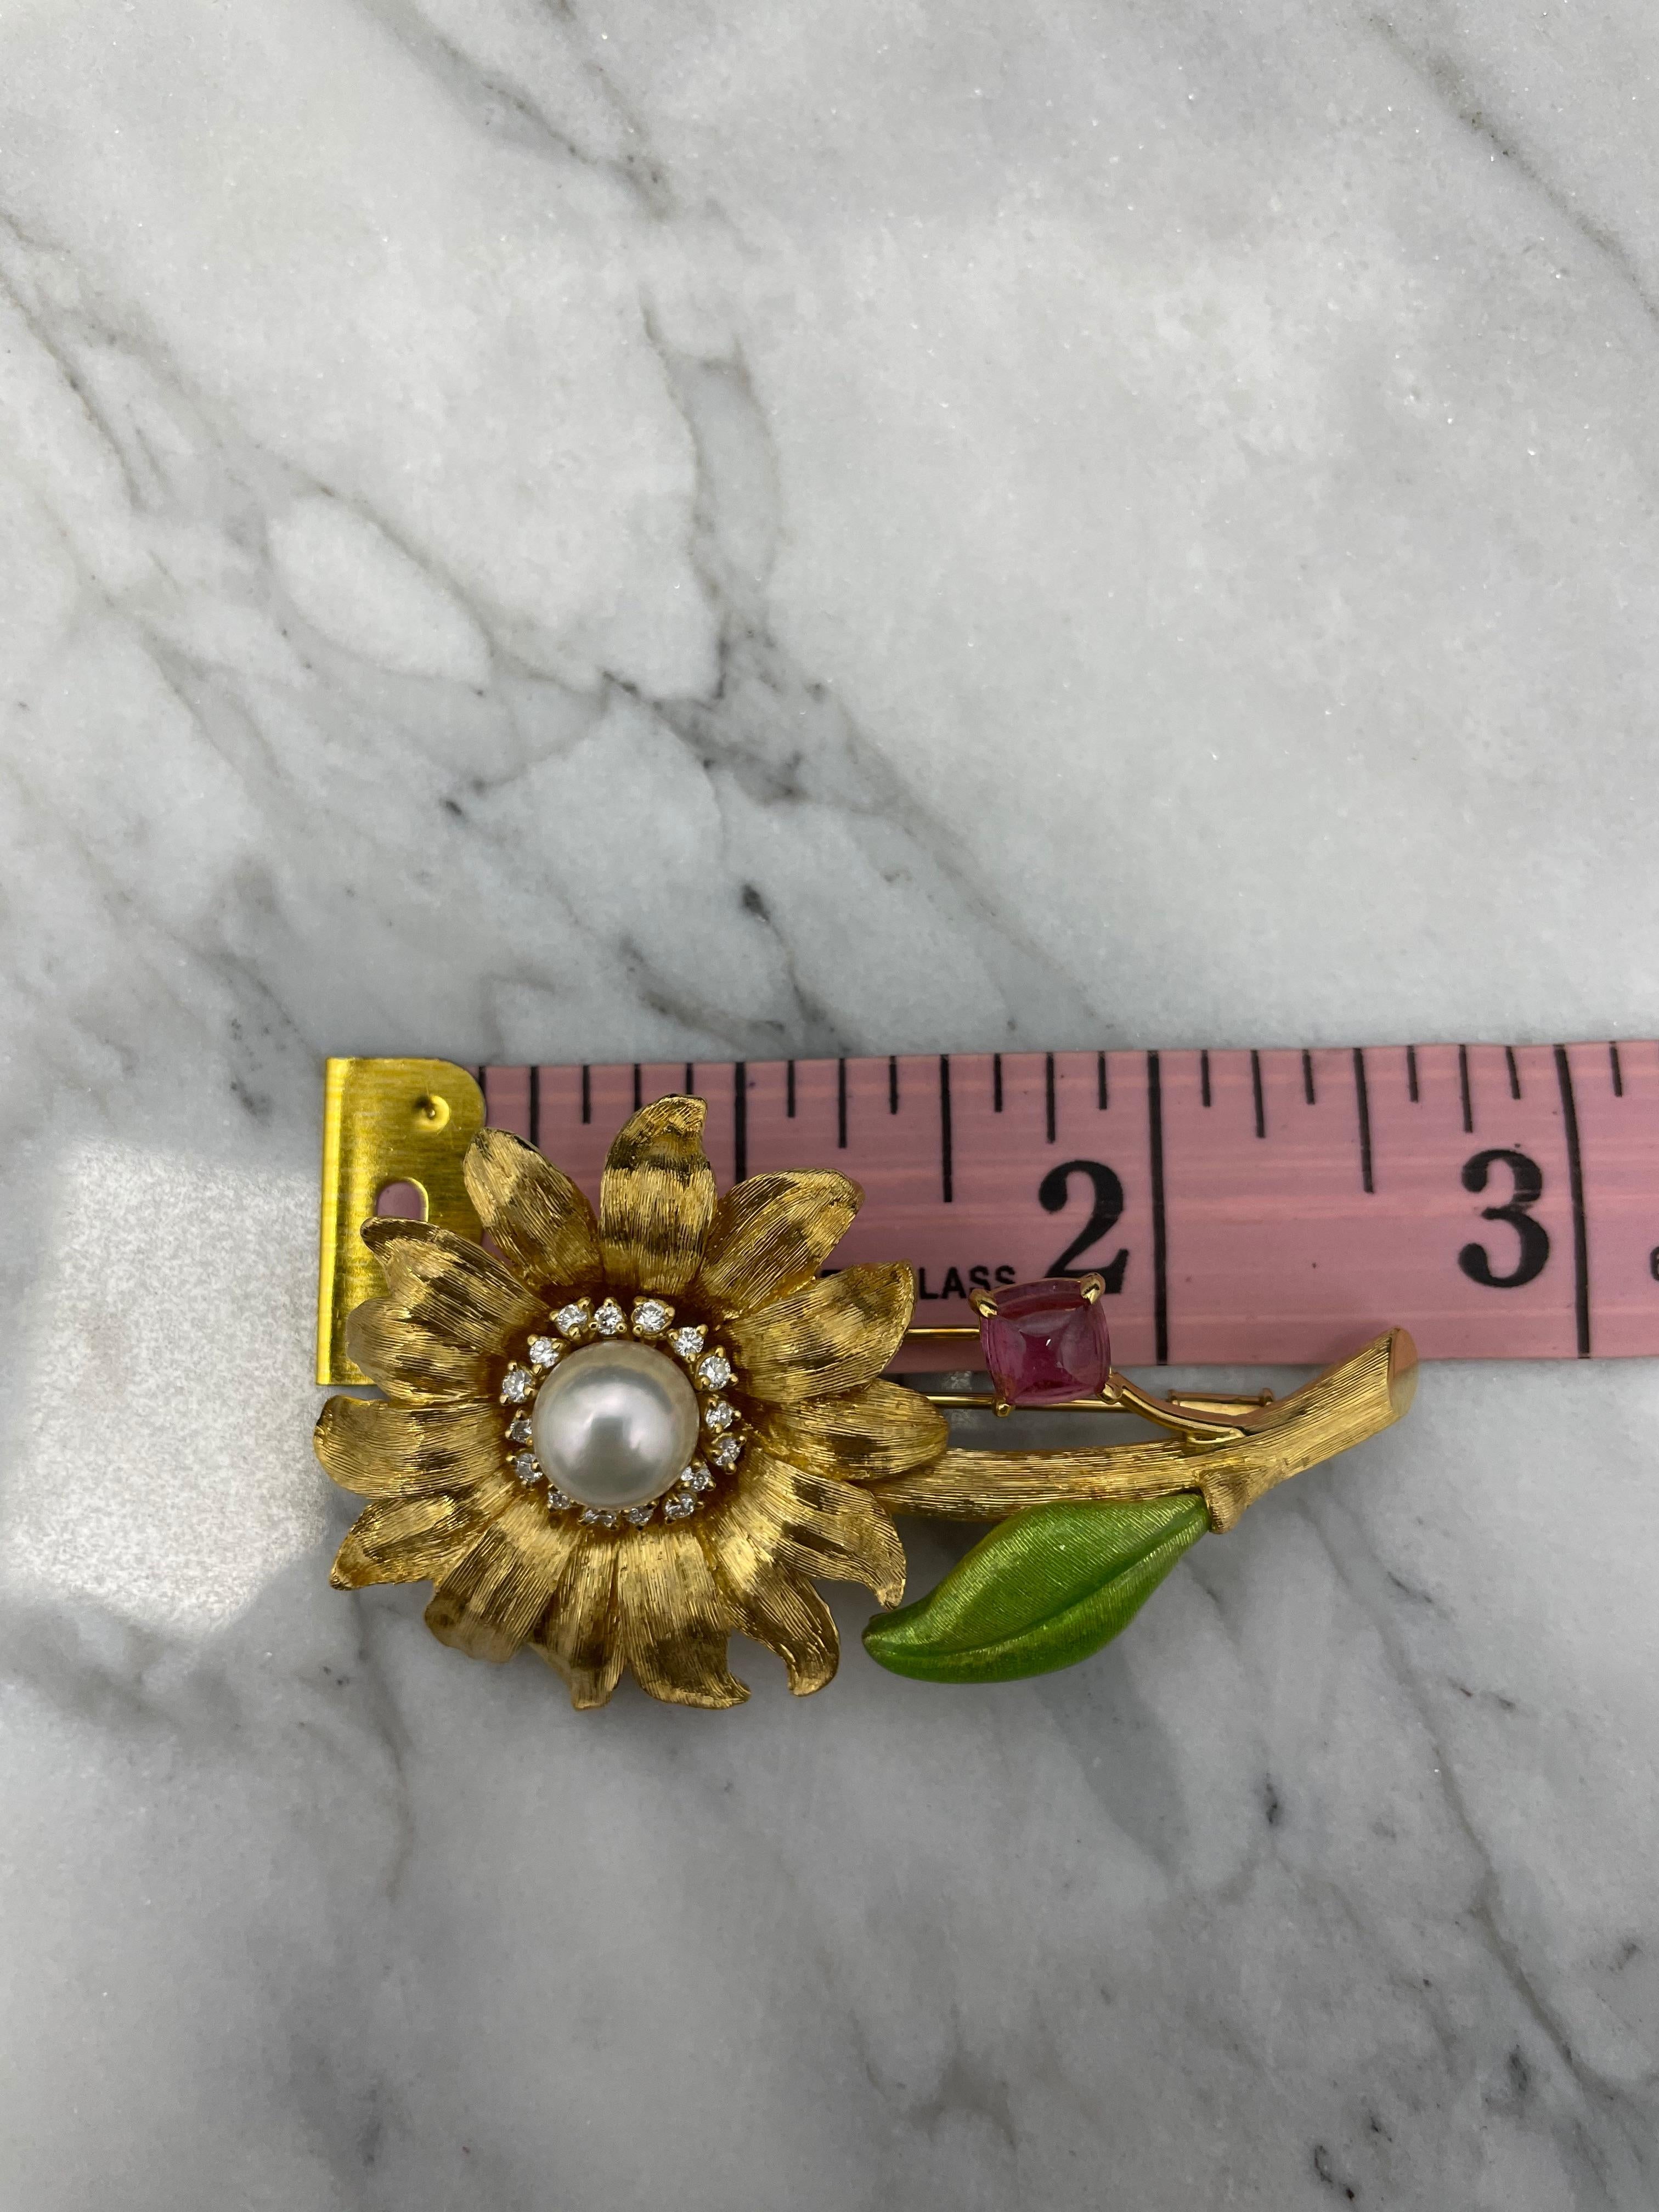 18K Yellow Gold, Pink Tourmaline, Diamond and Pearl Flower Brooch

Full-cut diamonds weighing a total of approximately 0.35 carat; Pink tourmaline sugarloaf cabochon weighing approximately 1.40 carats

Pearl: Cultured pearl measuring 9.00 mm 
18K